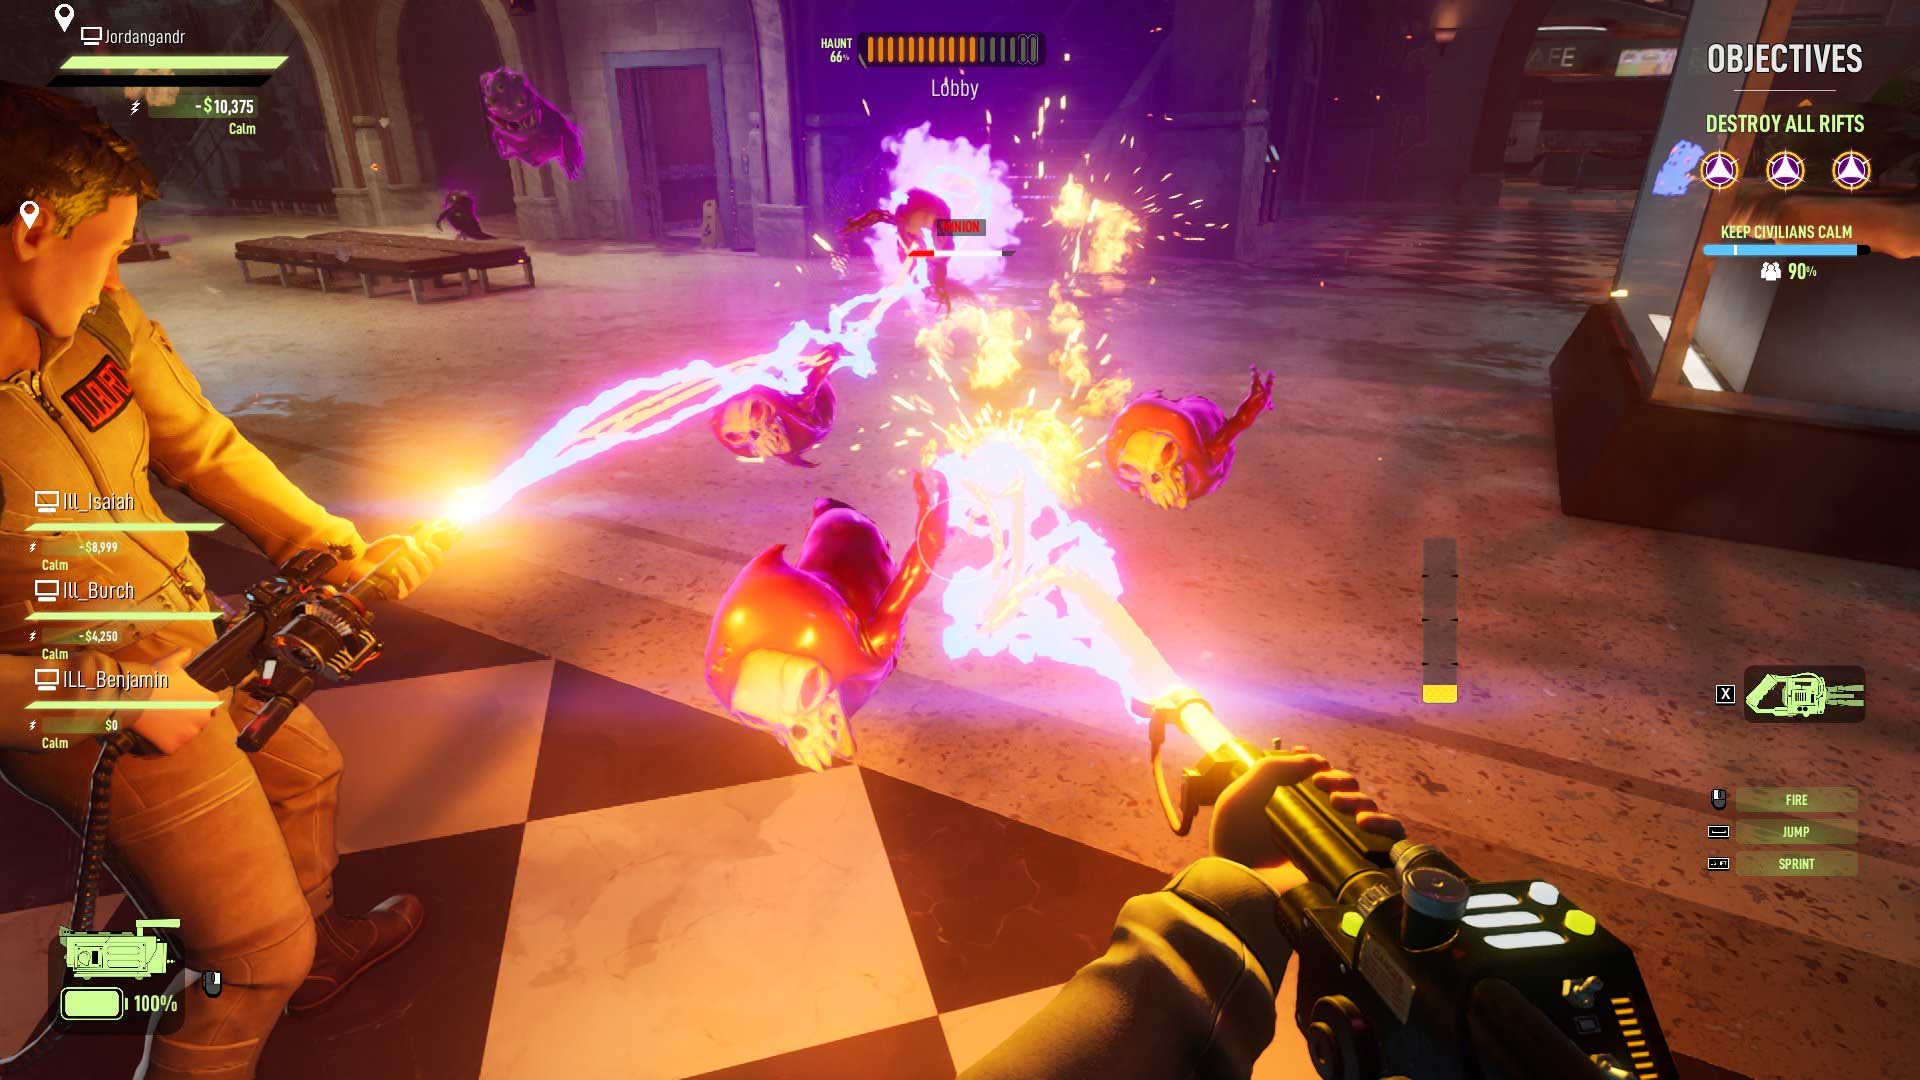 Ghostbusters: Spirits Unleashed release date